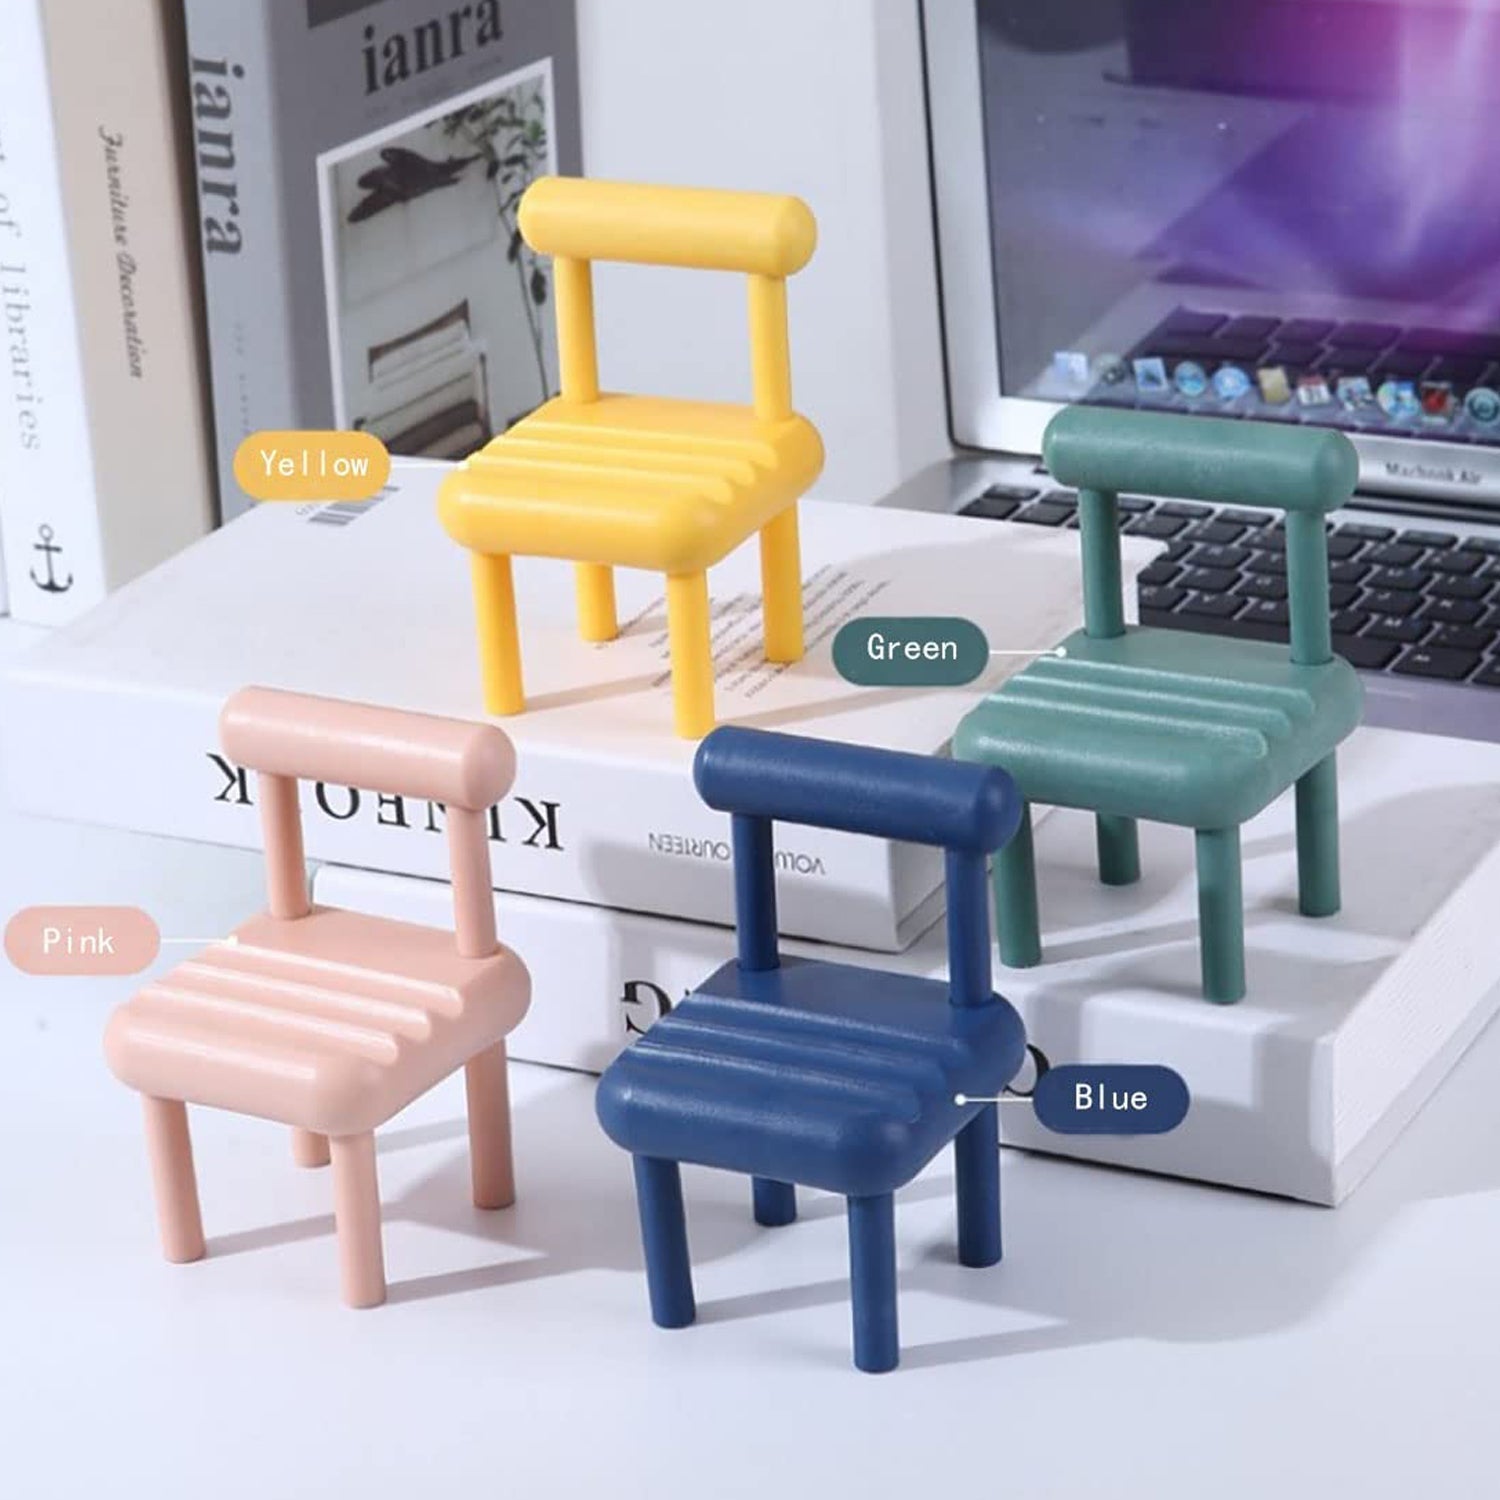 8886 Mobile Phone Holder, Mini Chair Cell Phone Stand, Portable Smartphone Dock, Cellphone Holder for Desktop Design Compatible with All Mobile Phones (1 Pc)